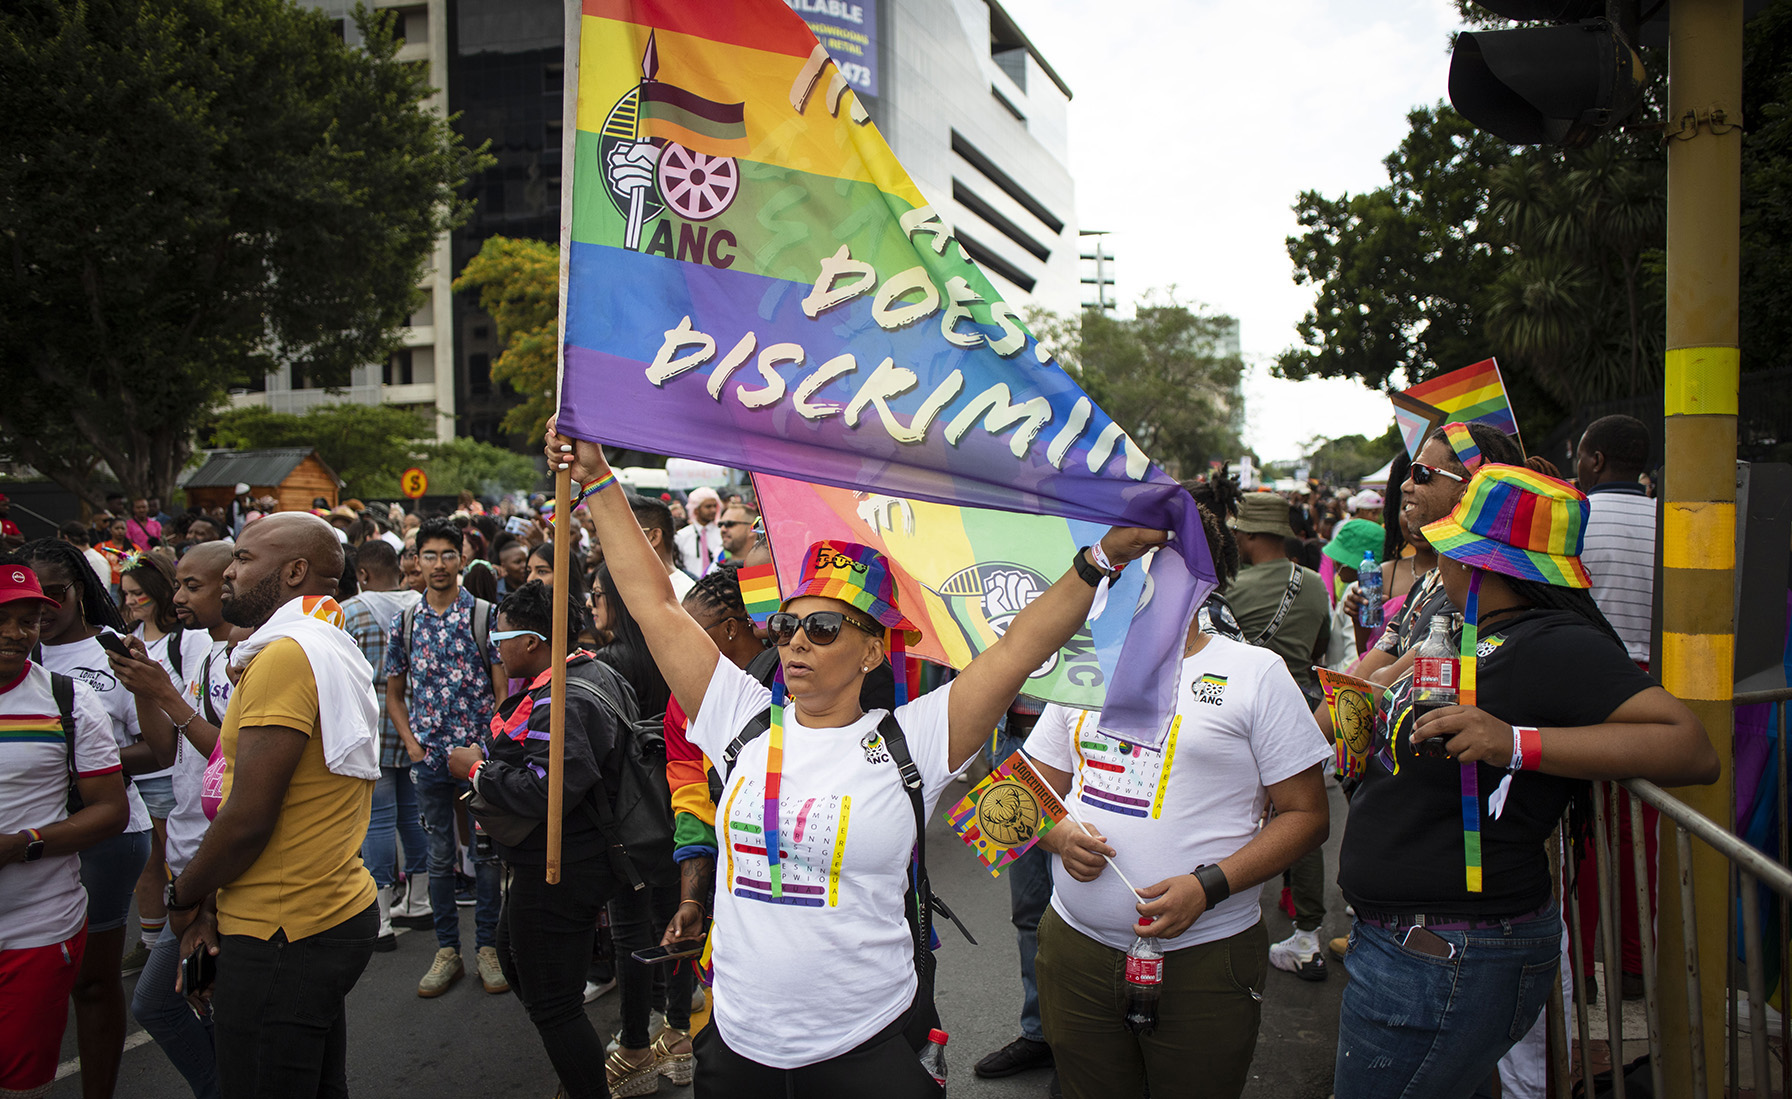 Members of the LGBTQI community attend the annual Gay Pride march in Johannesburg, South Africa, 29 October 2022. (Photo: EPA-EFE / KIM LUDBROOK)